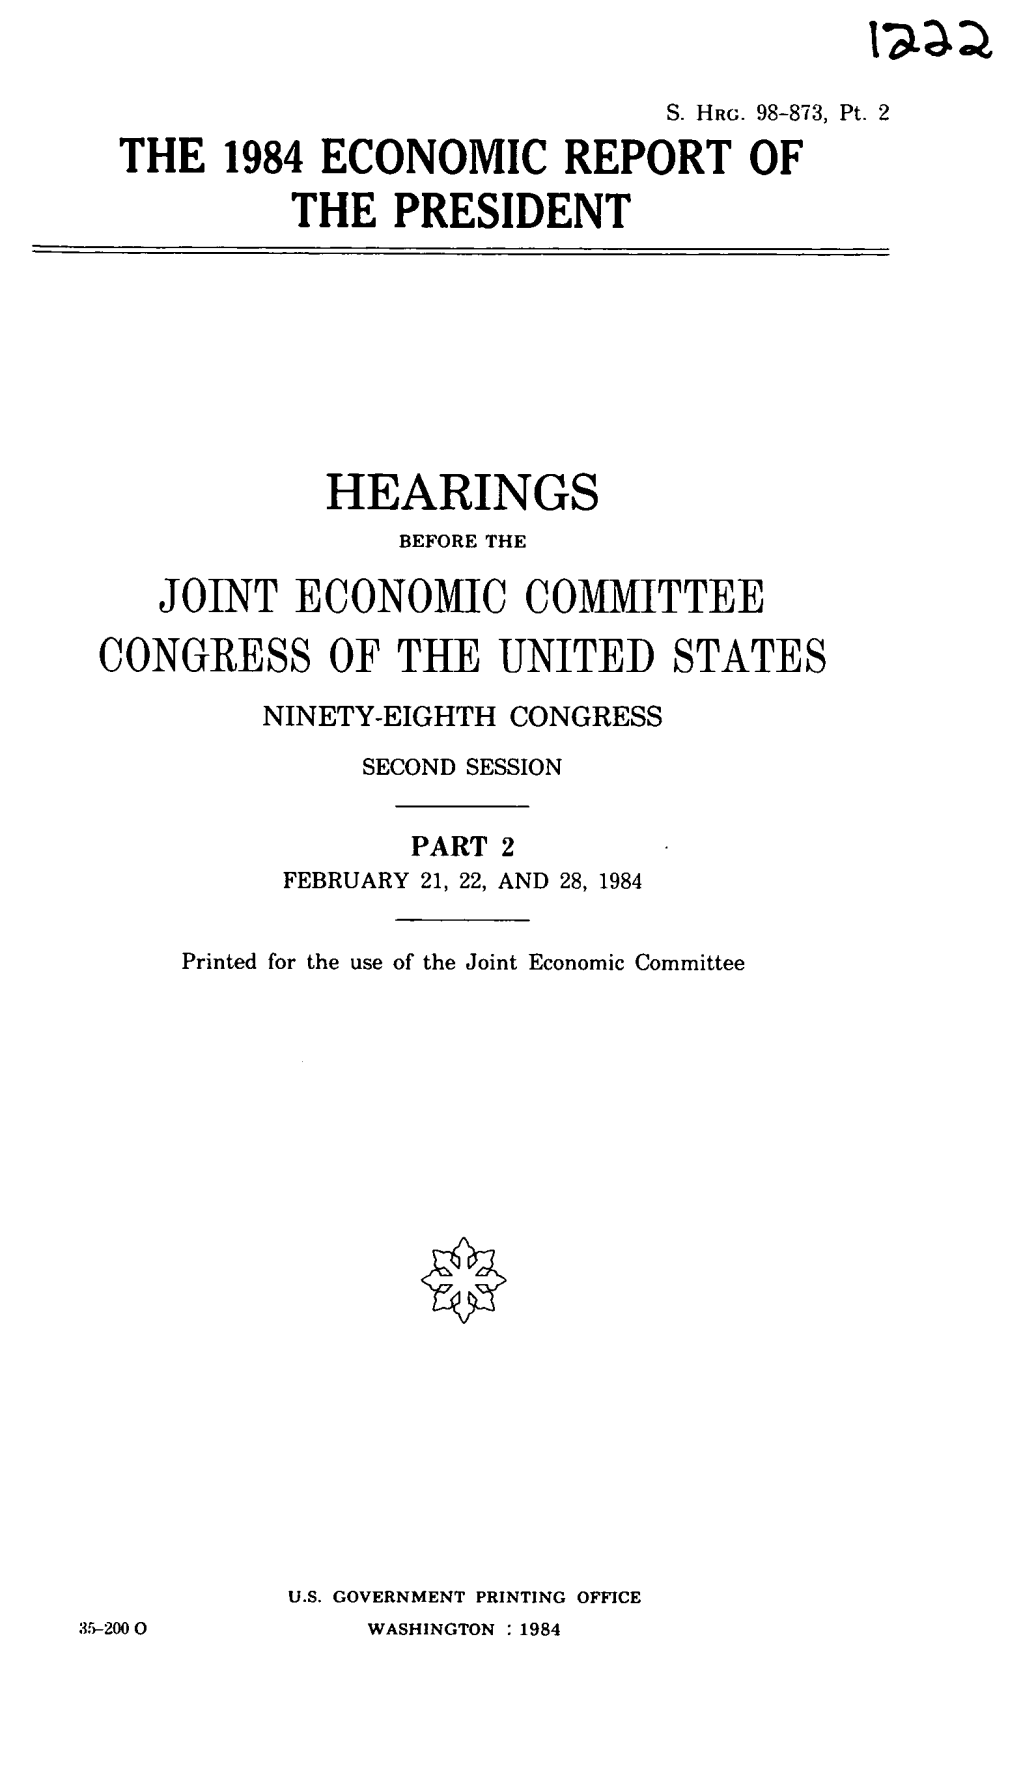 The 1984 Economic Report of the President Hearings